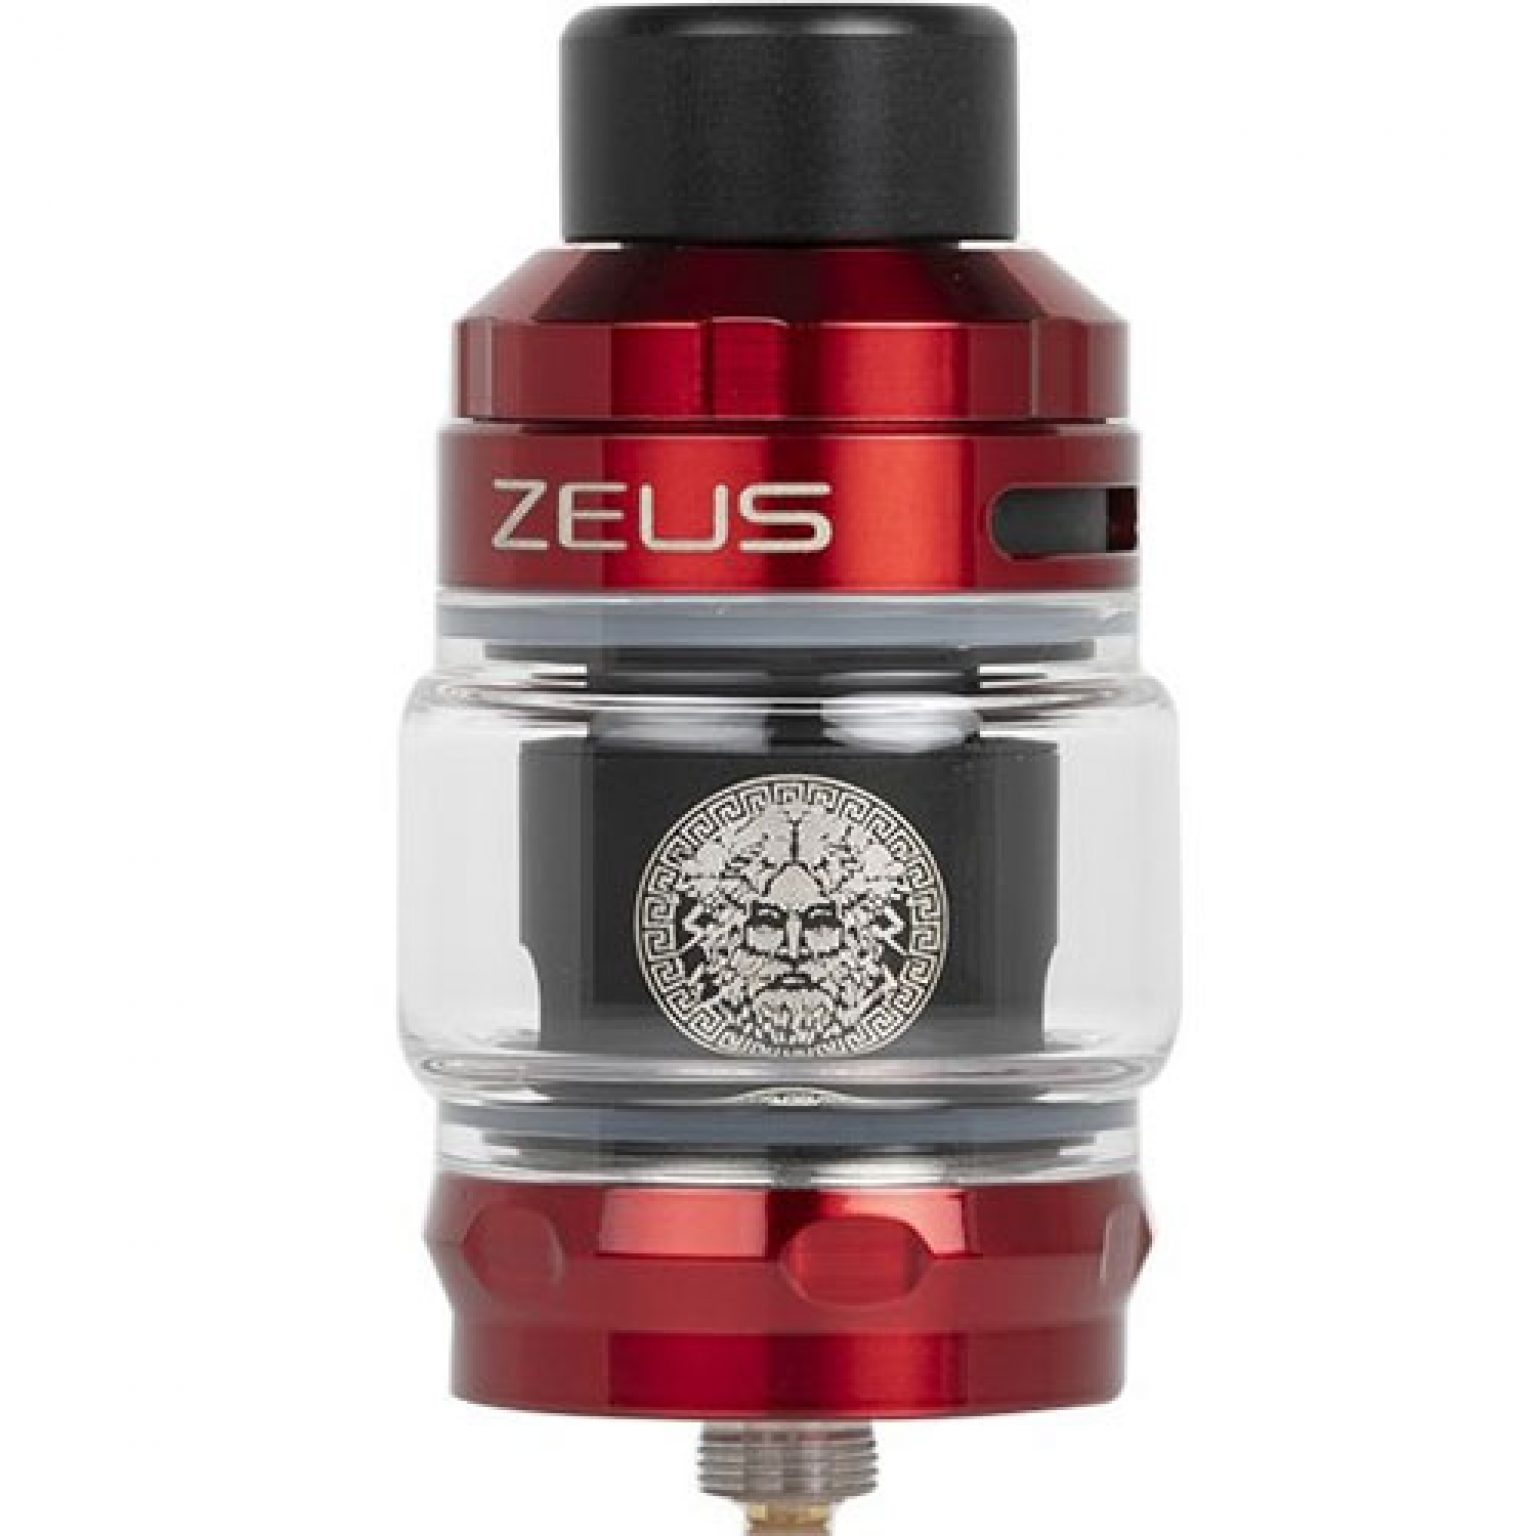 6 Best Sub Ohm Tanks for Clouds and Flavor [TODAY] Mega Vaper